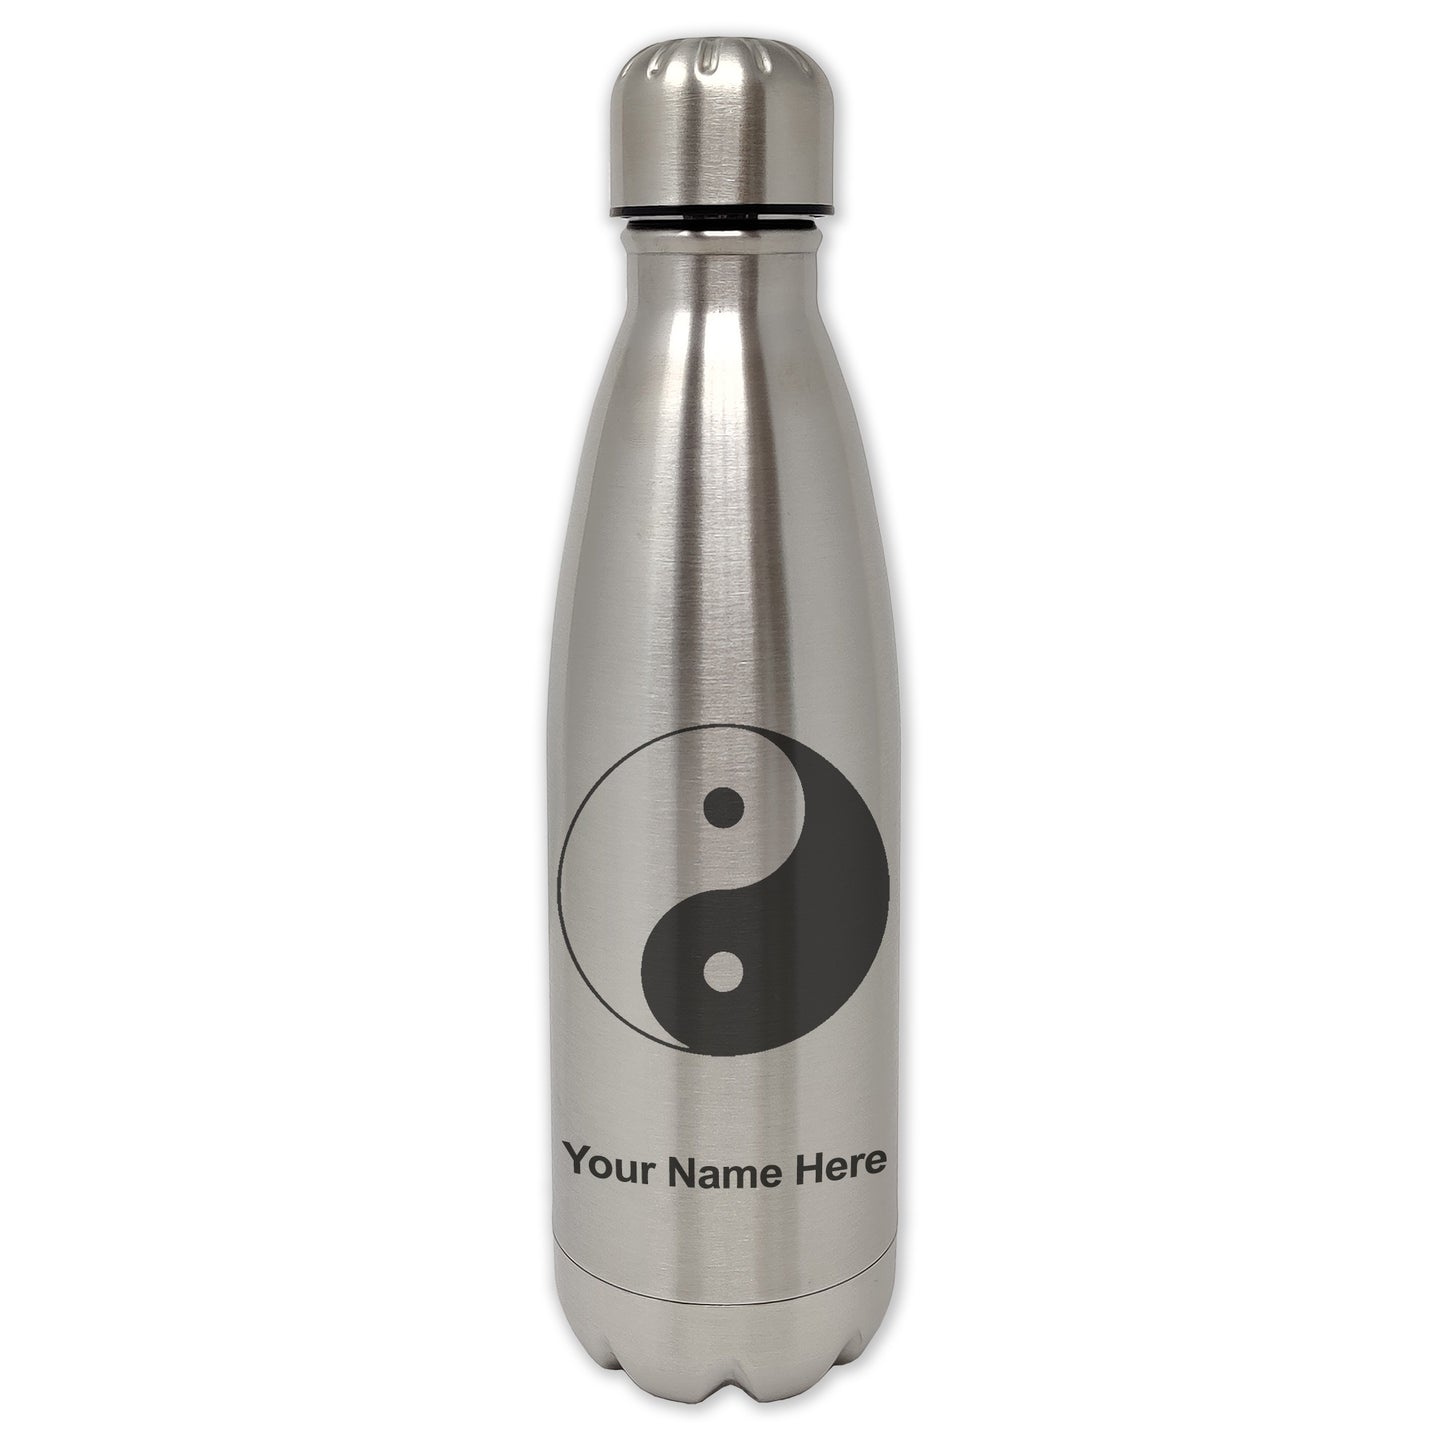 LaserGram Double Wall Water Bottle, Yin Yang, Personalized Engraving Included